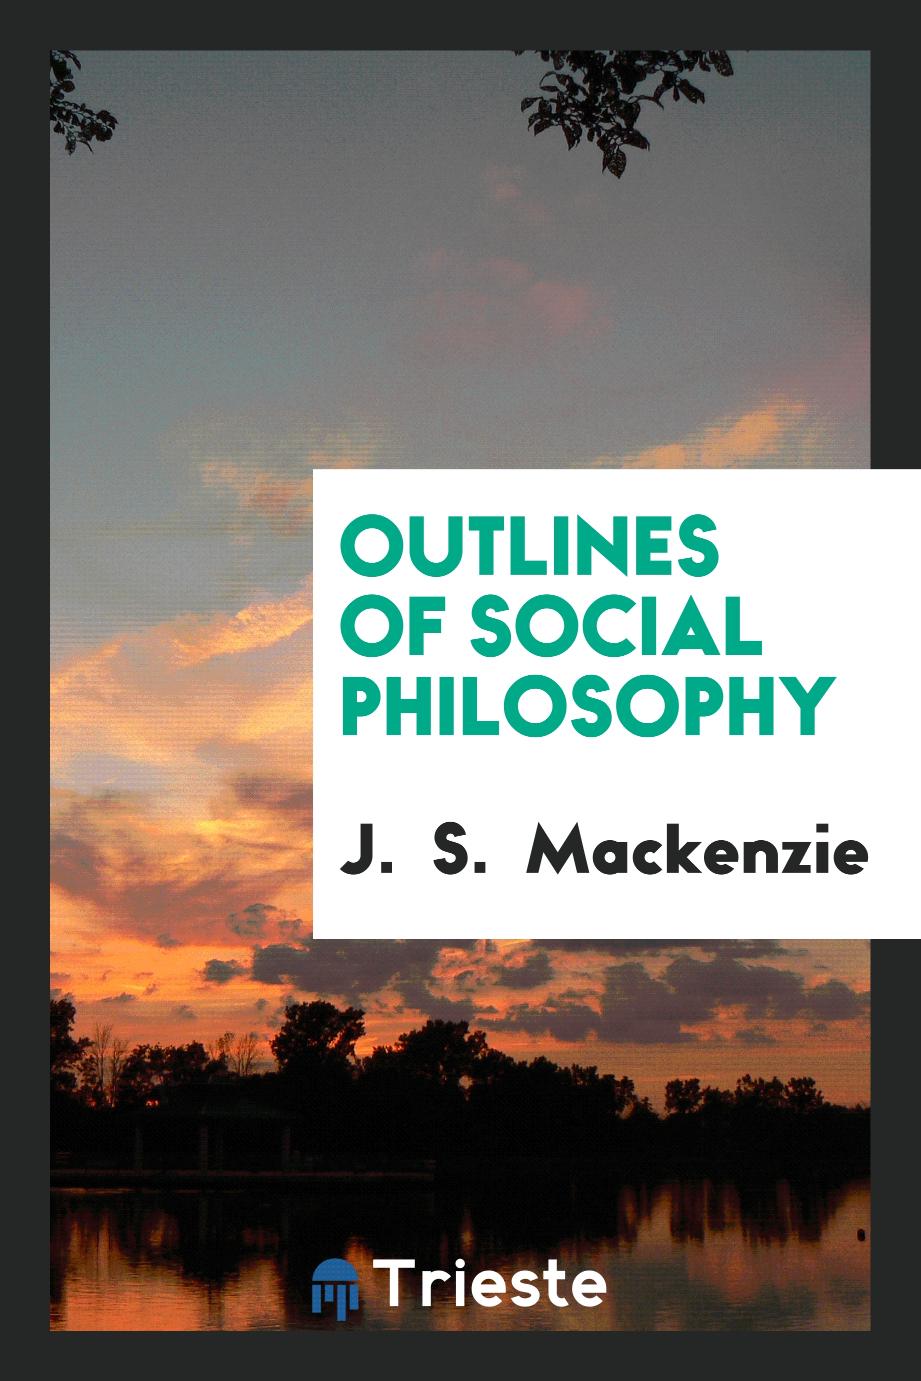 Outlines of social philosophy